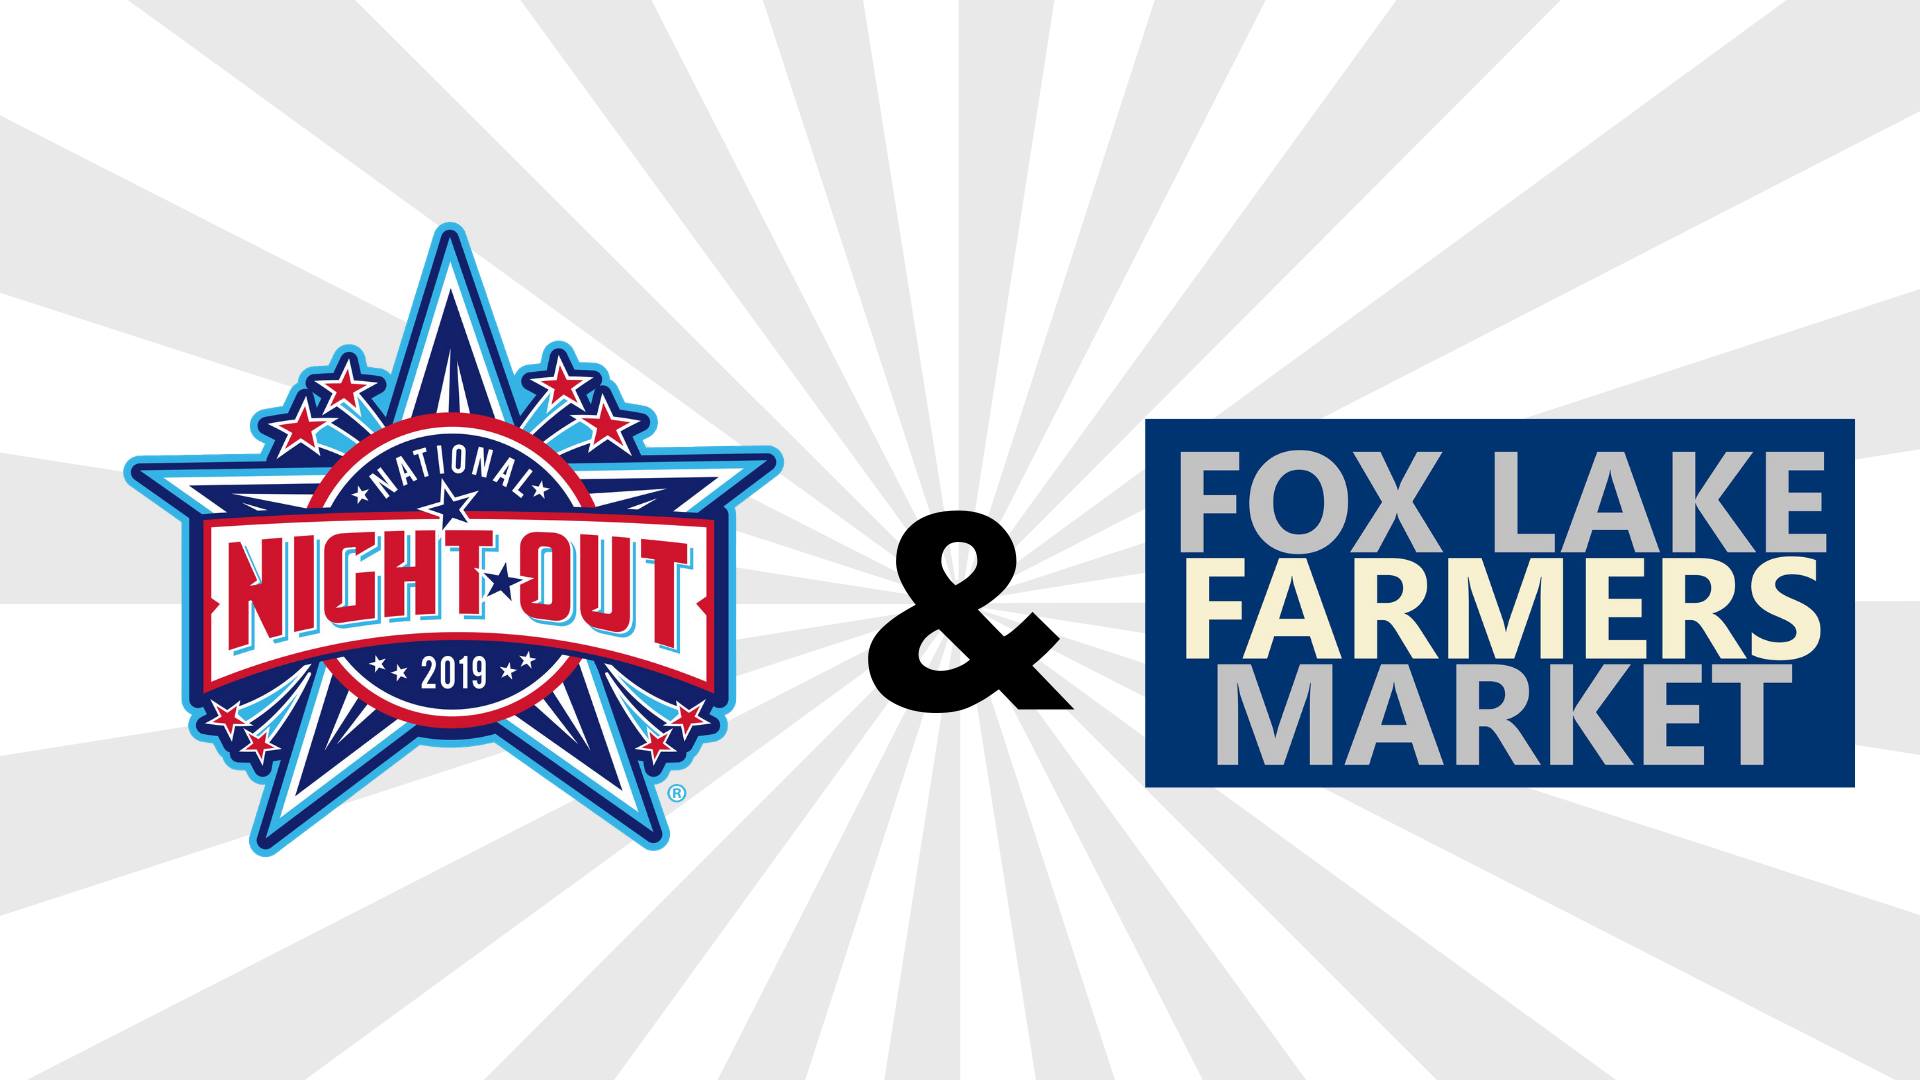 Fox Lake's National Night Out at the Fox Lake Farmers Market